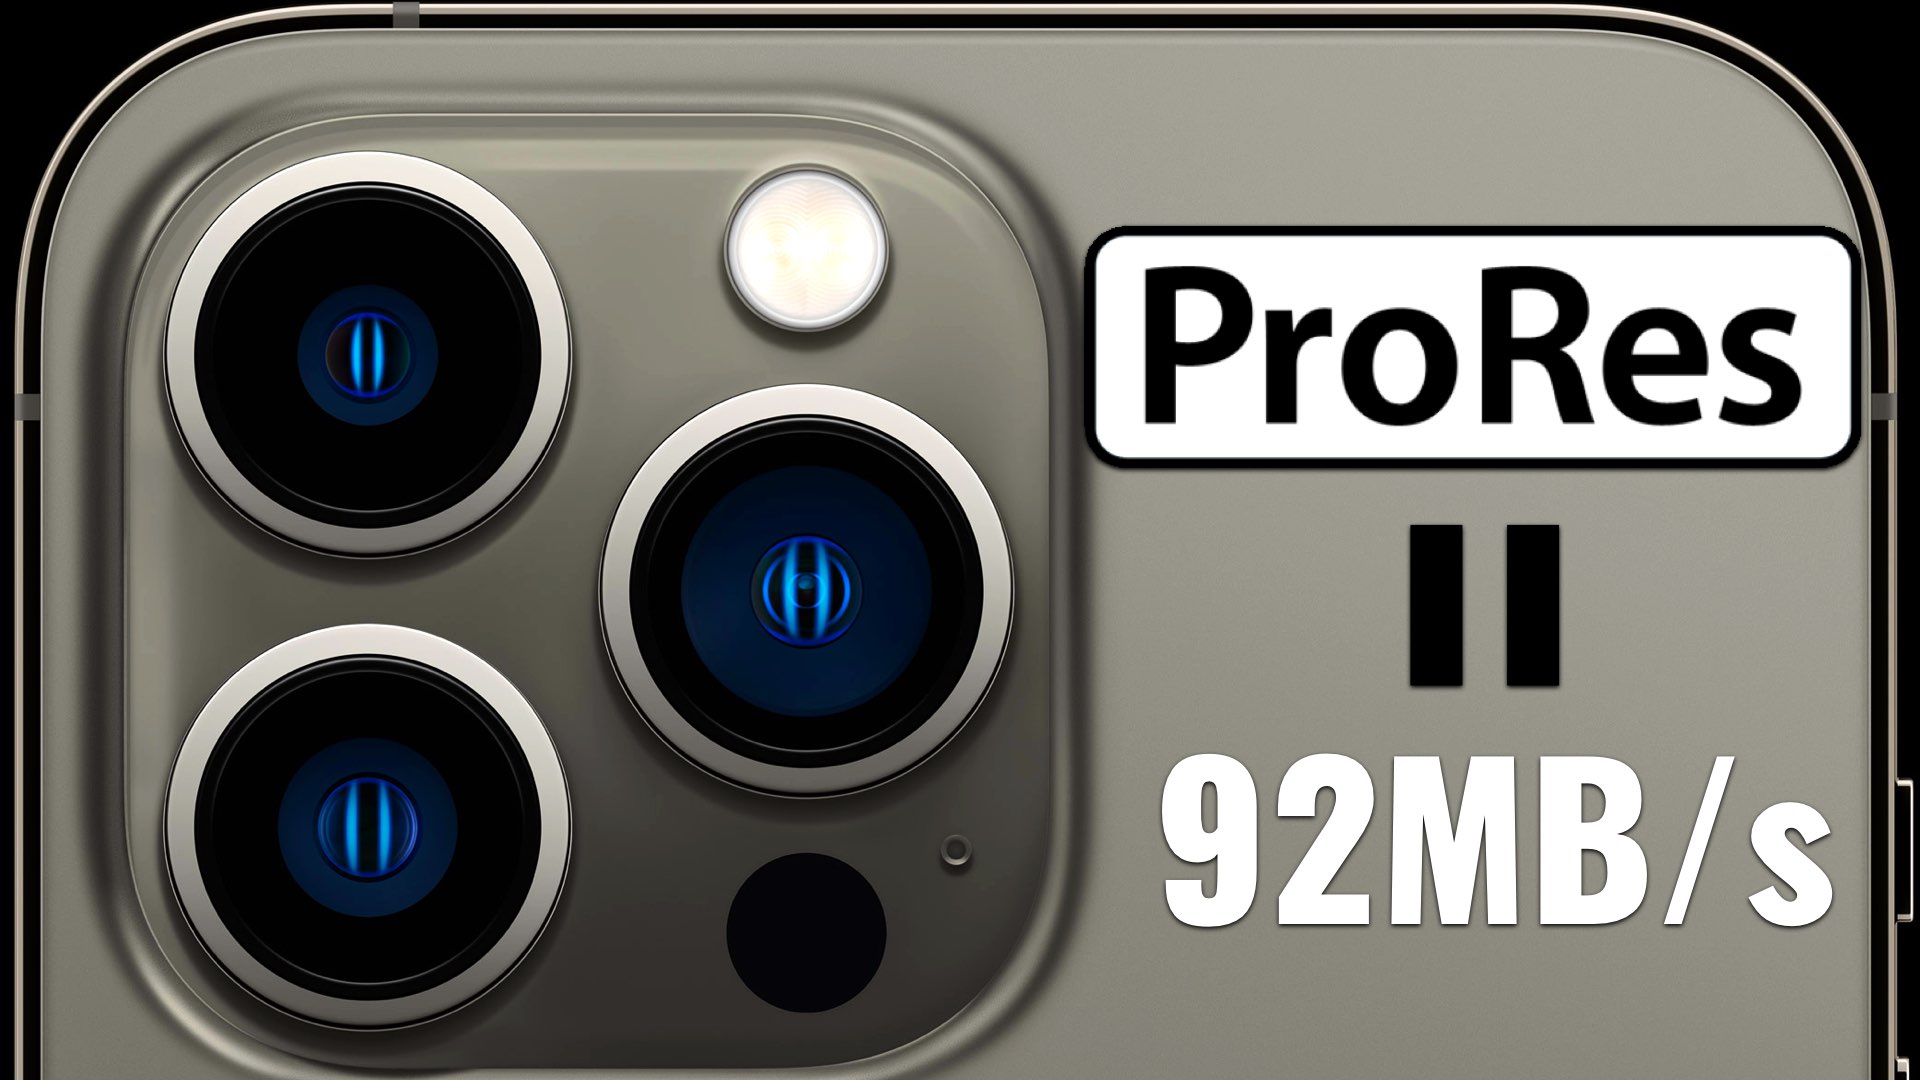 Shooting 4K ProRes Video Requires iPhone 13 Pro With at Least 256GB Storage  - MacRumors